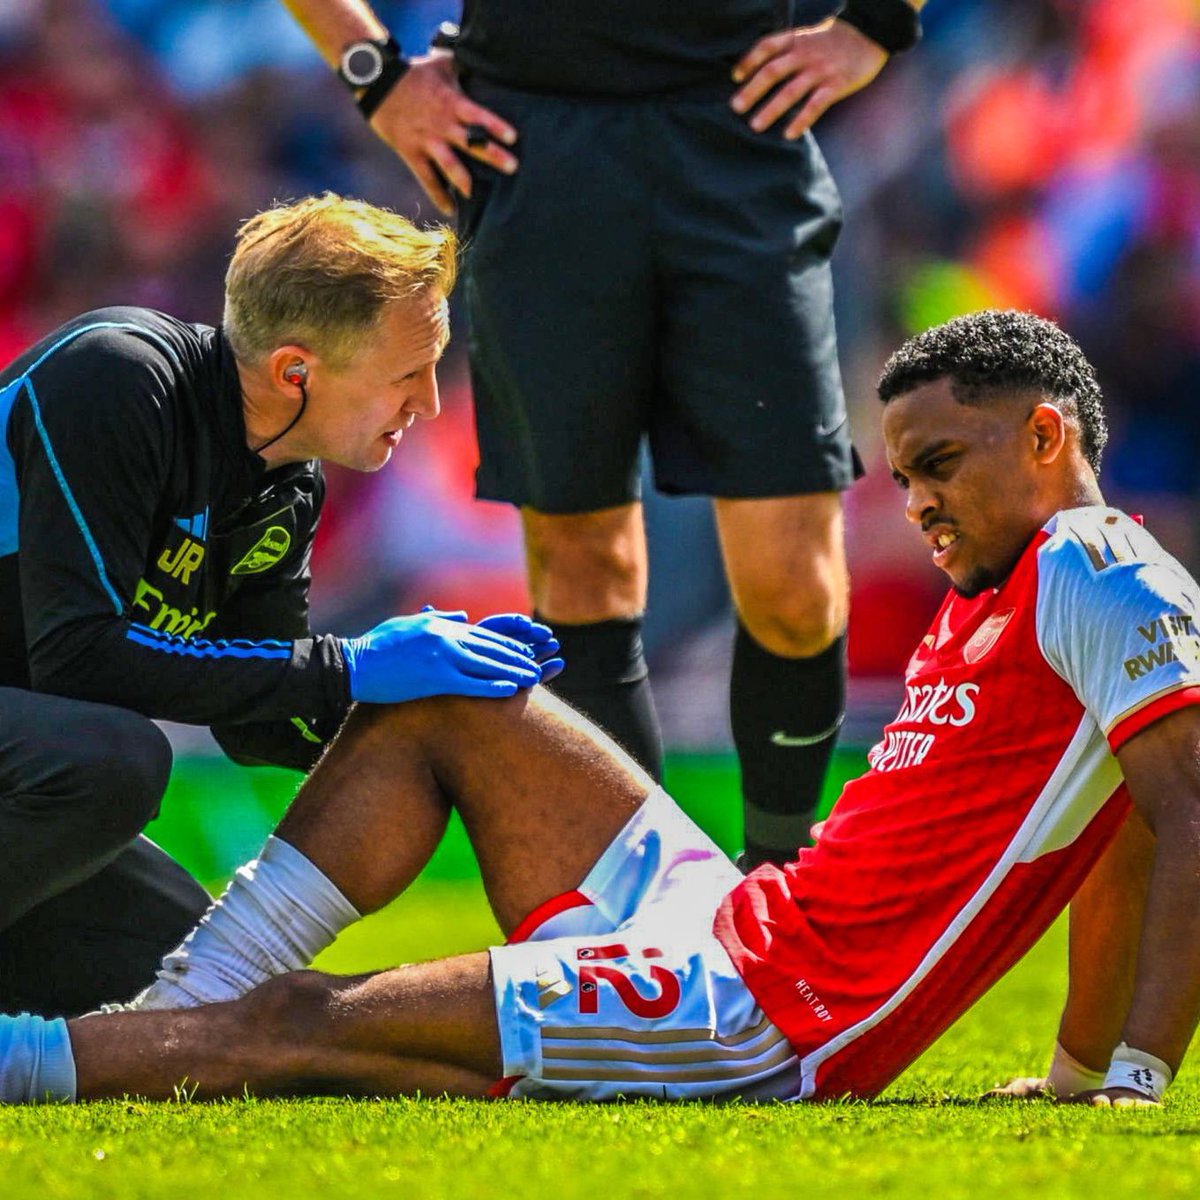 Official: Jurrien Timber has torn his ACL as consultant specialists confirm after further check with Arsenal 🚨🔴⚪️

“We can confirm that Jurrien Timber has sustained an injury to anterior cruciate ligament in his right knee. Jurrien will undergo surgery in the coming days”.